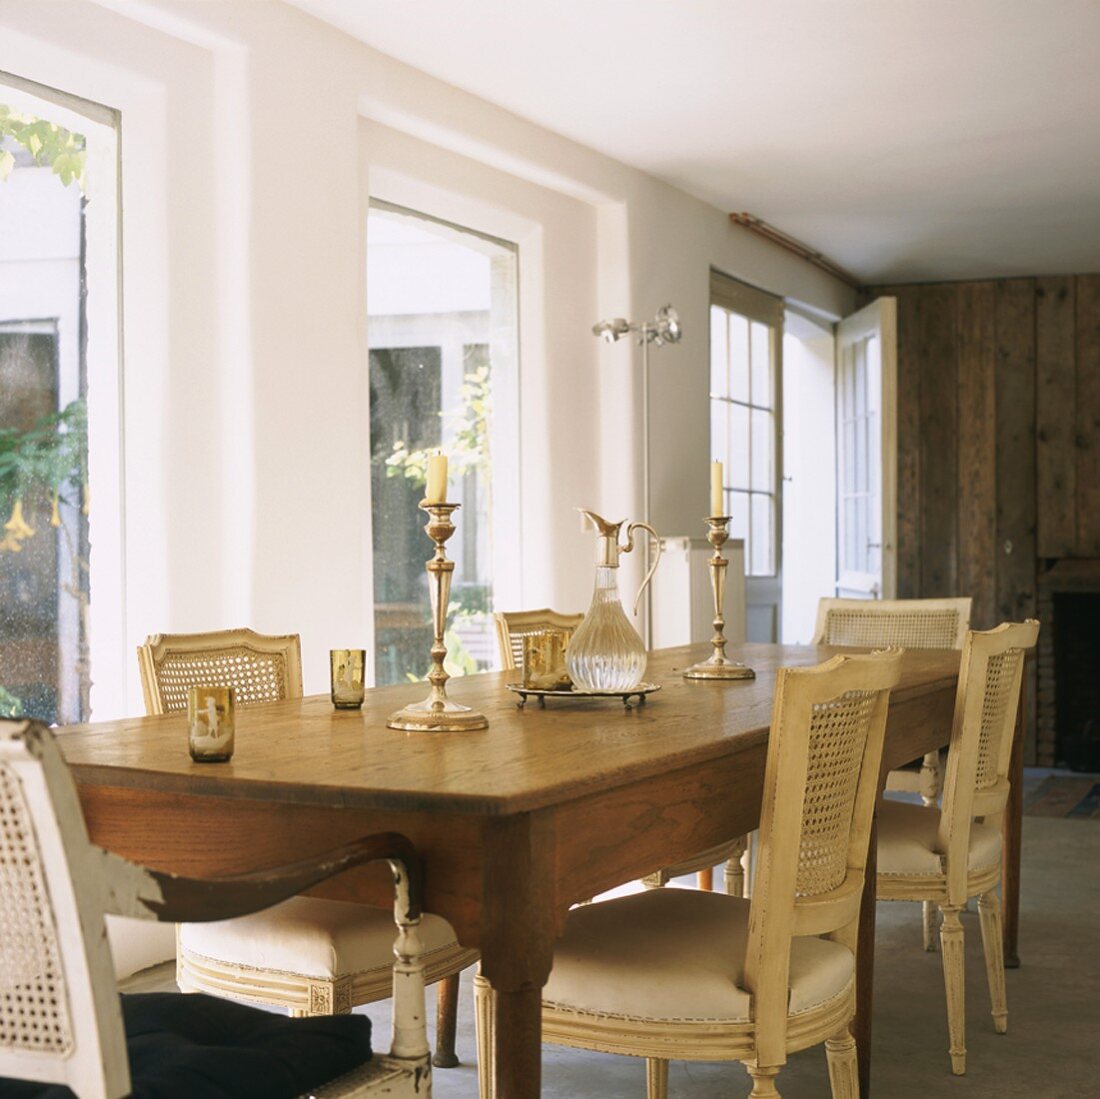 Long dining table and upholstered chairs with cane backrests